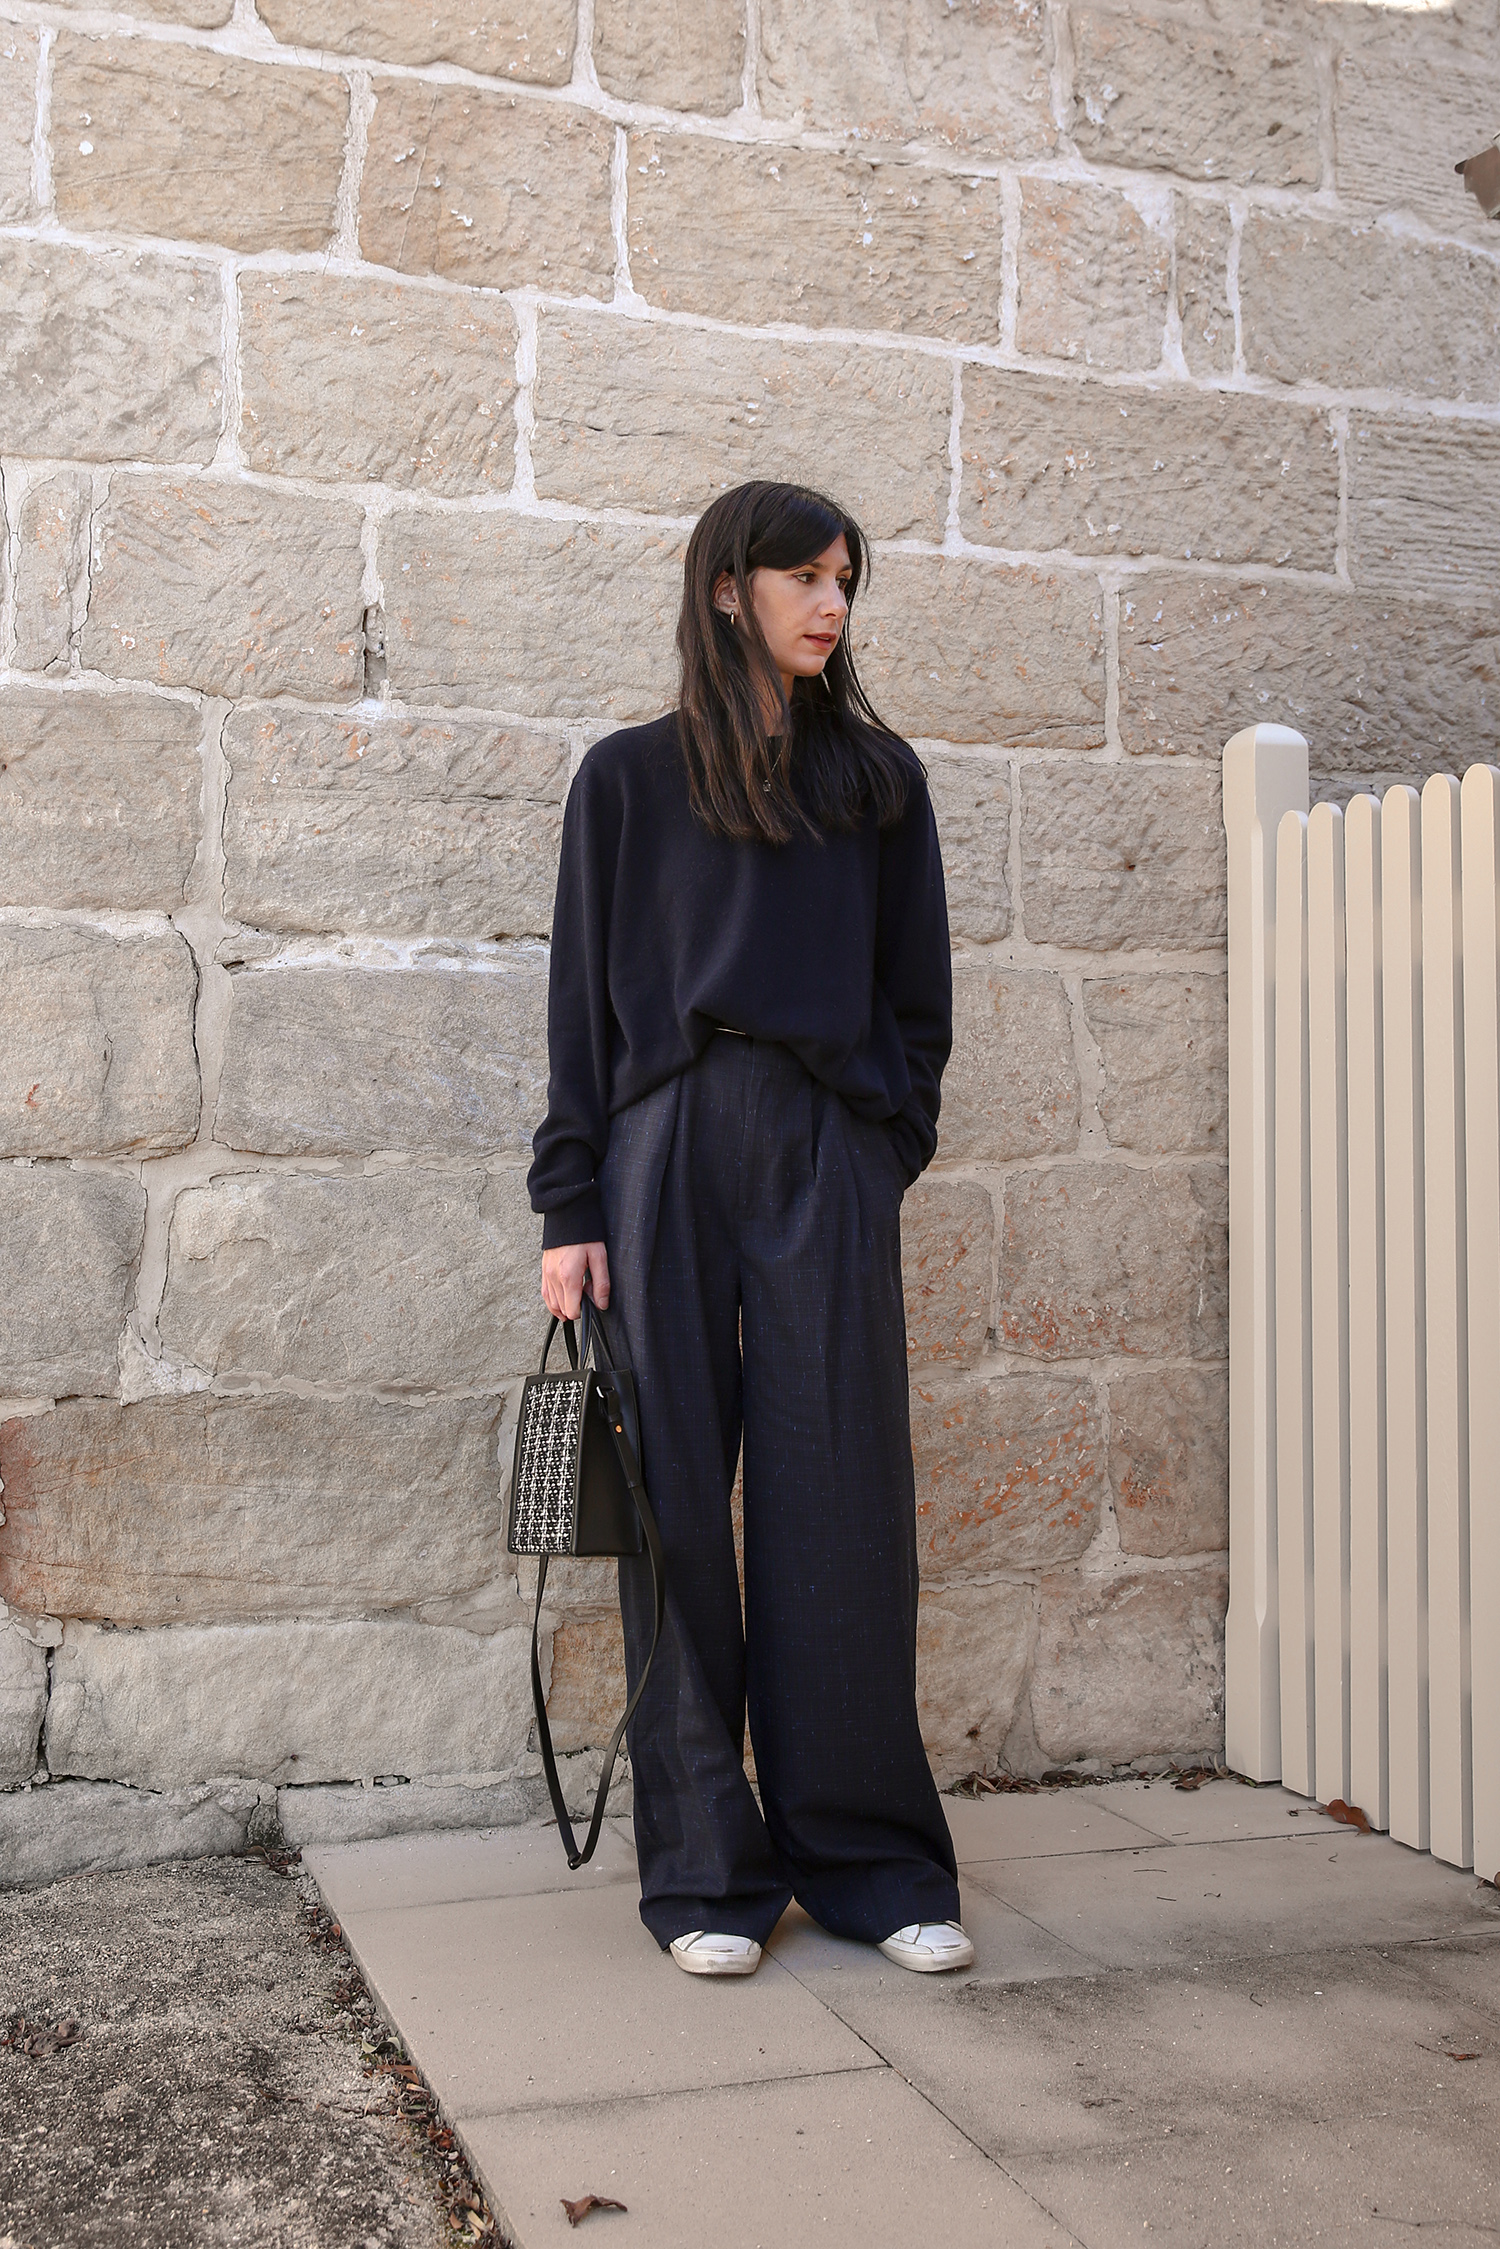 A simple winter outfit wearing wide leg trousers